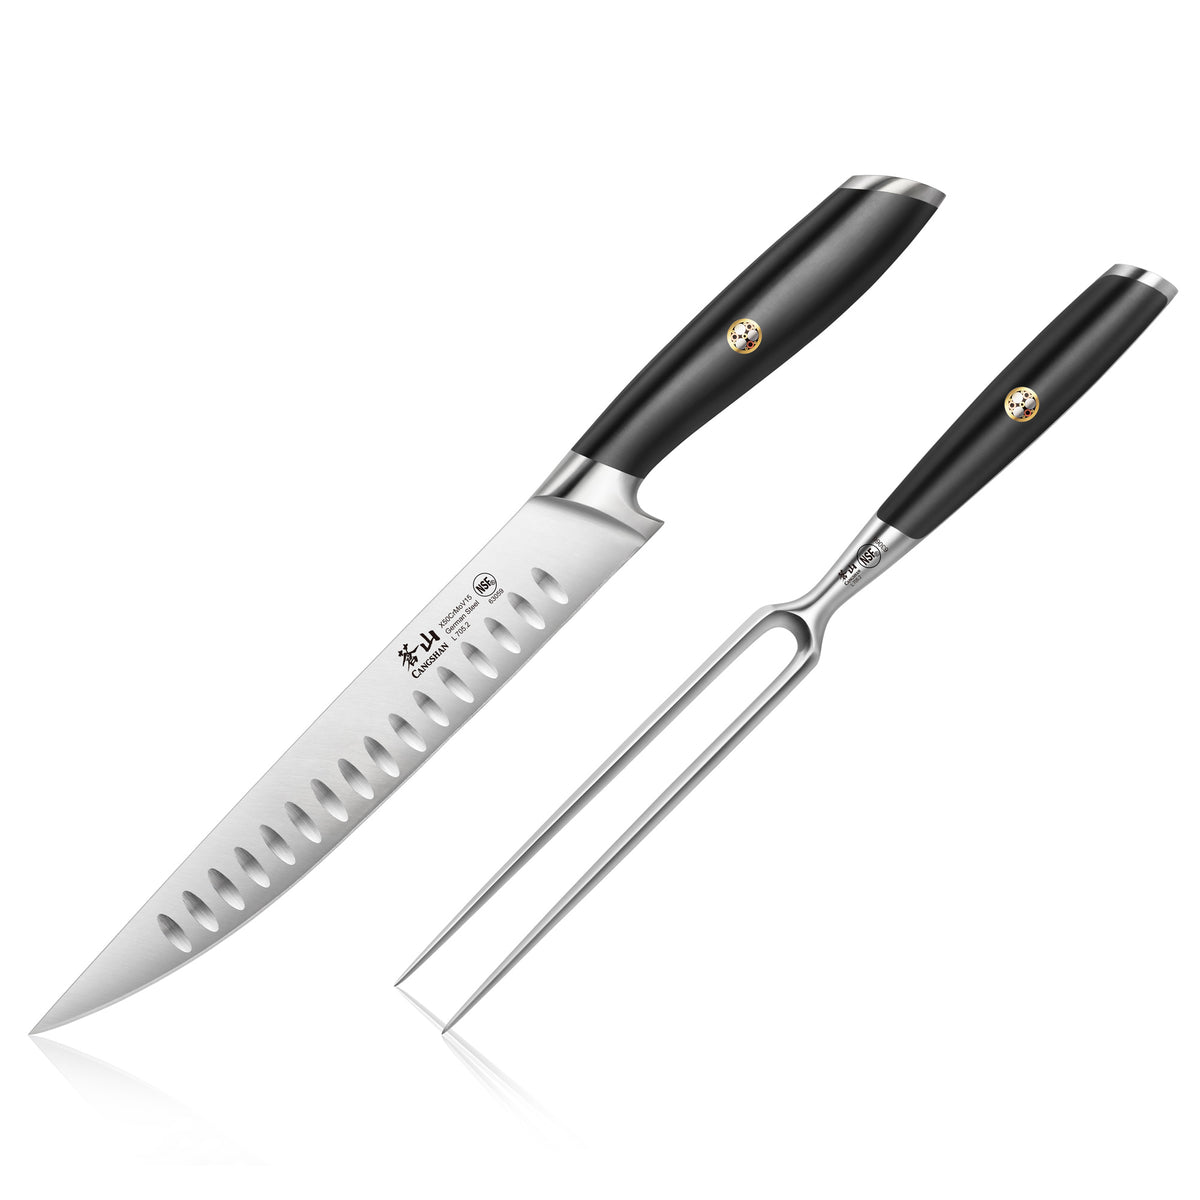 L Series 2-Piece Carving Set, Forged German Steel, Black, 1026955 –  Cangshan Cutlery Company